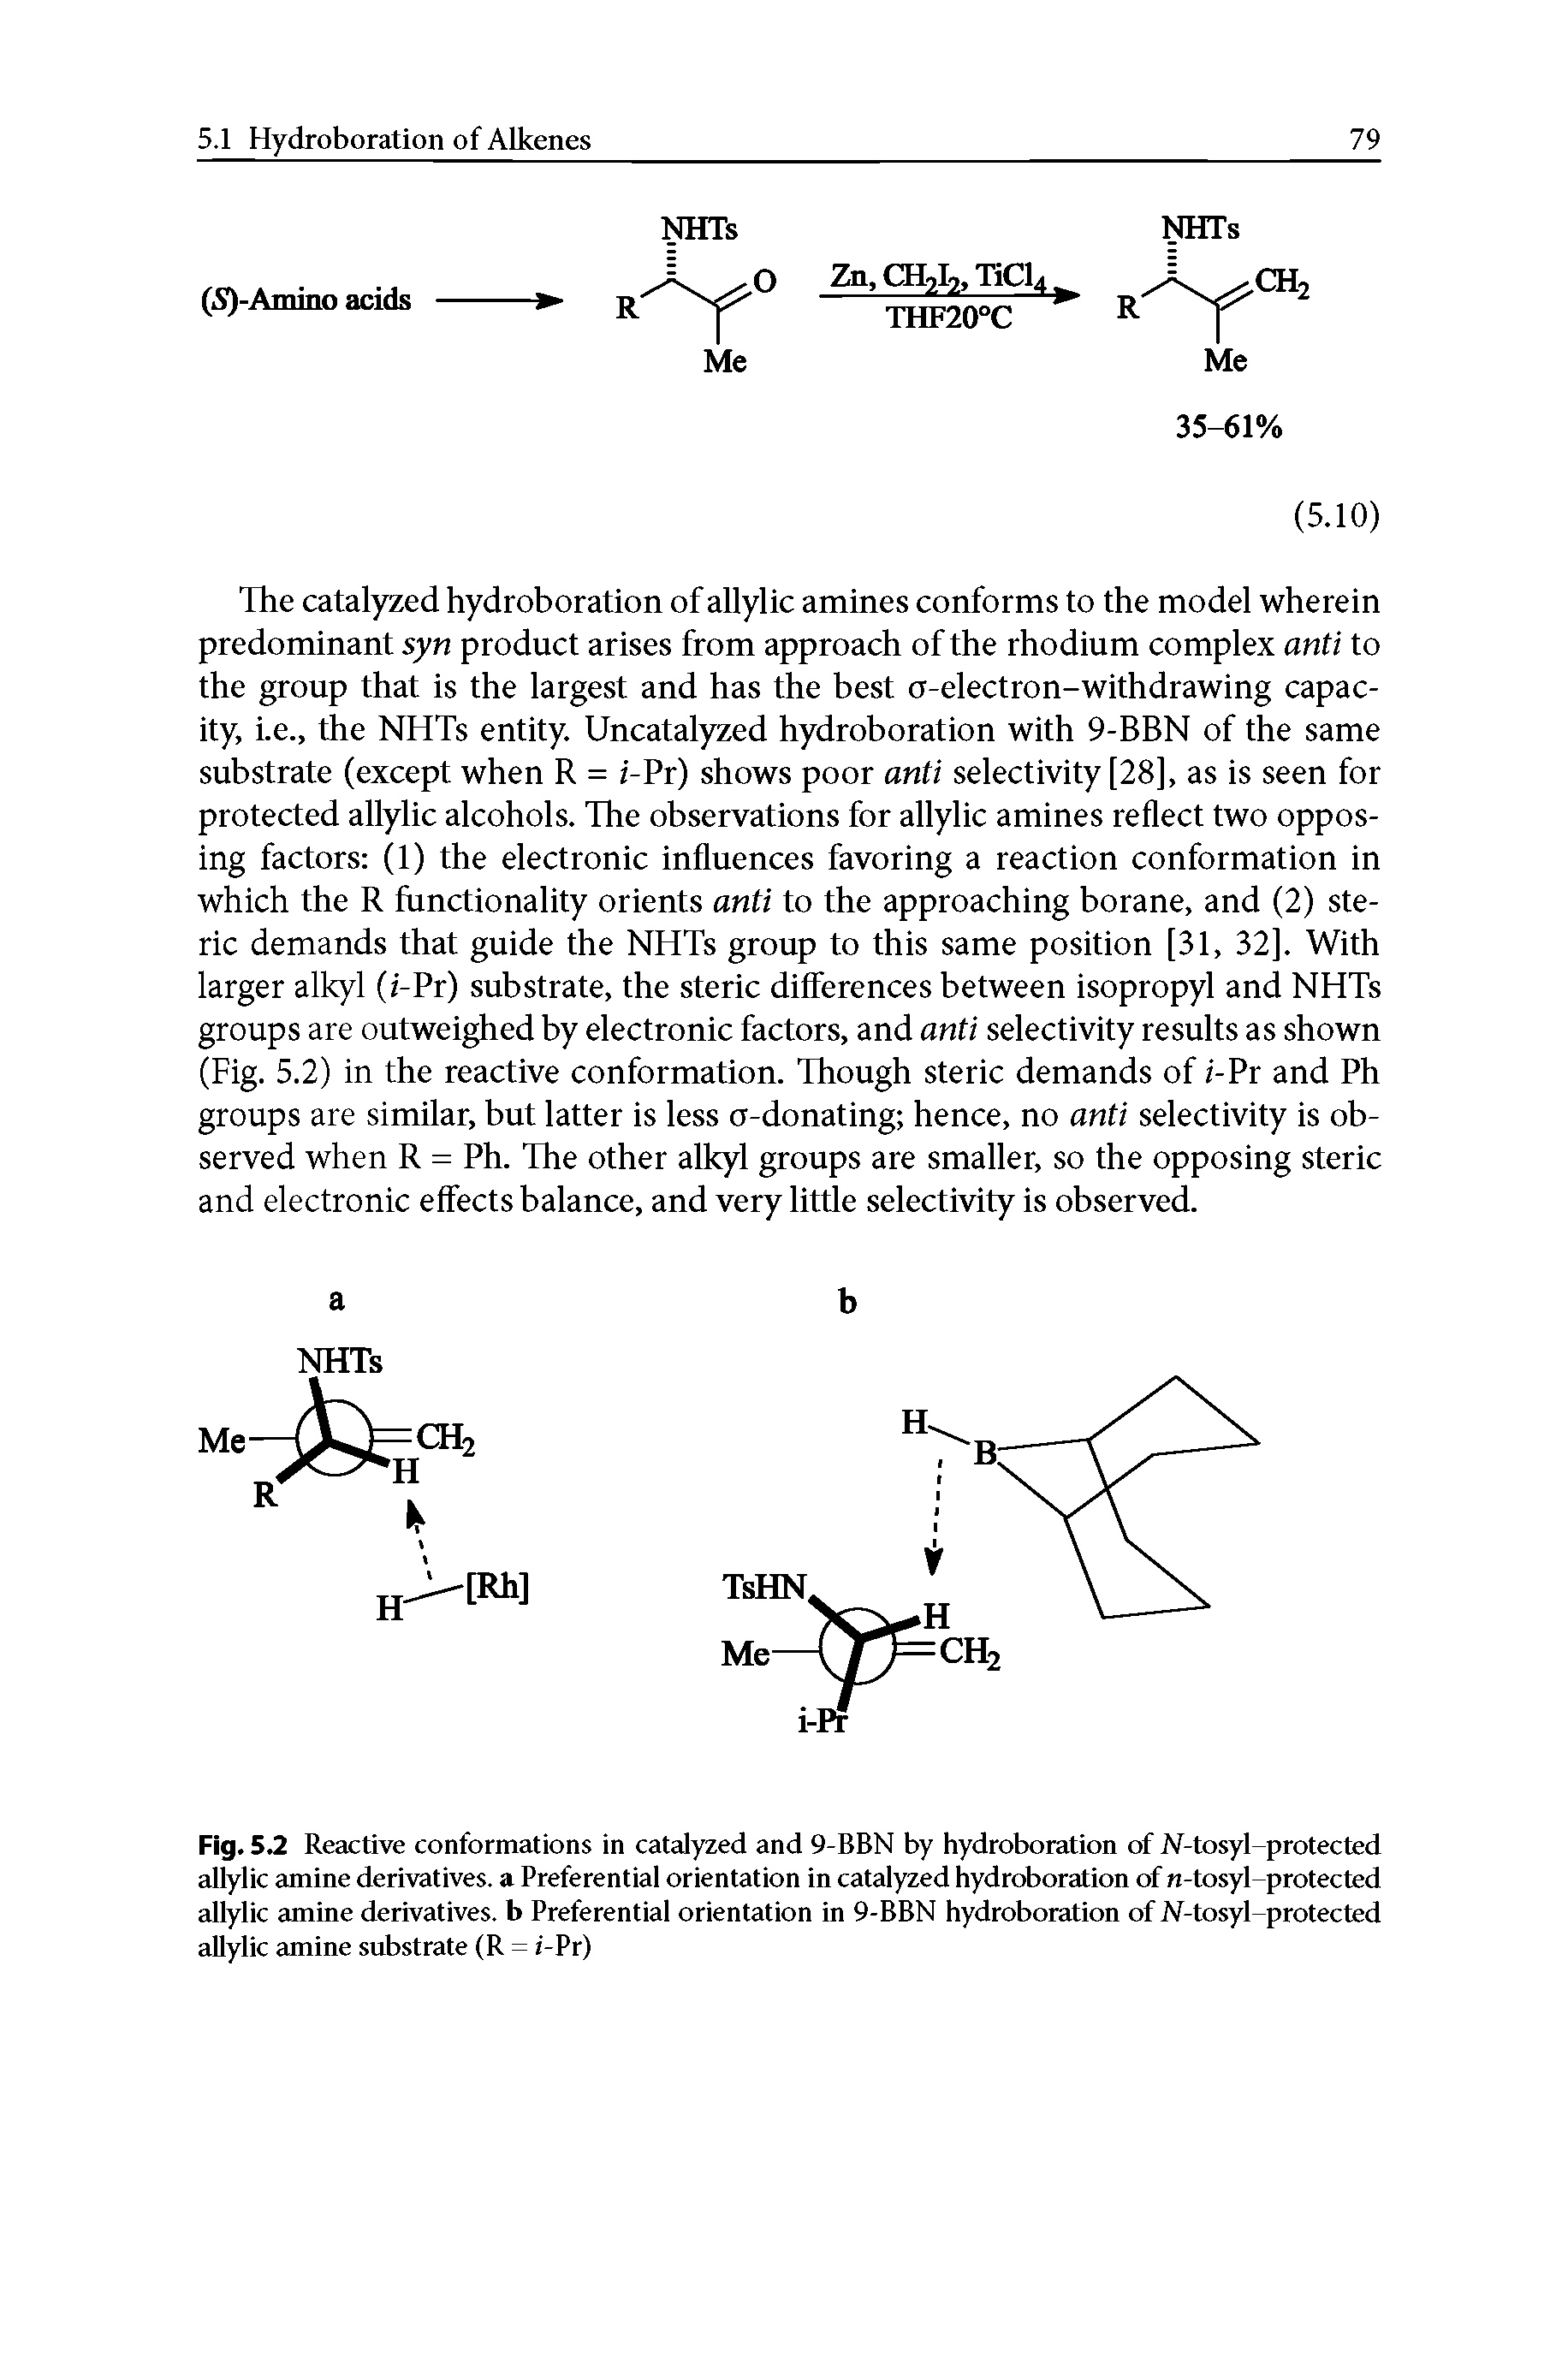 Fig. 5.2 Reactive conformations in catalyzed and 9-BBN by hydroboration of N-tosyl-protected allylic amine derivatives, a Preferential orientation in catalyzed hydroboration of n-tosyl-protected allylic amine derivatives, b Preferential orientation in 9-BBN hydroboration of N-tosyl-protected allylic amine substrate (R = i-Pr)...